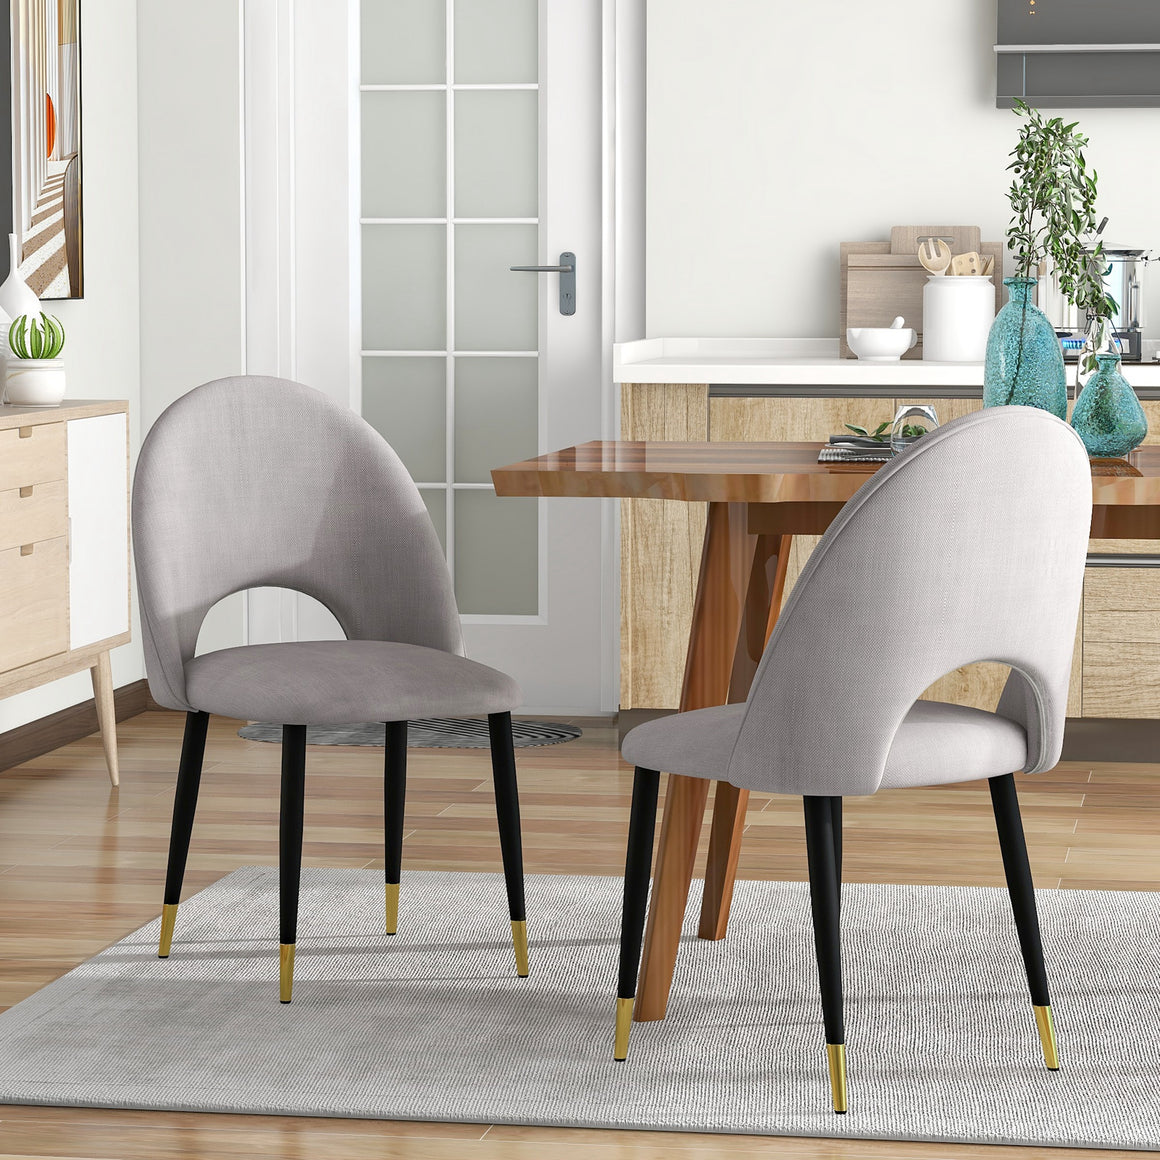 uhomepro Fabric Upholstered Dining Chairs Set of 2, Beige